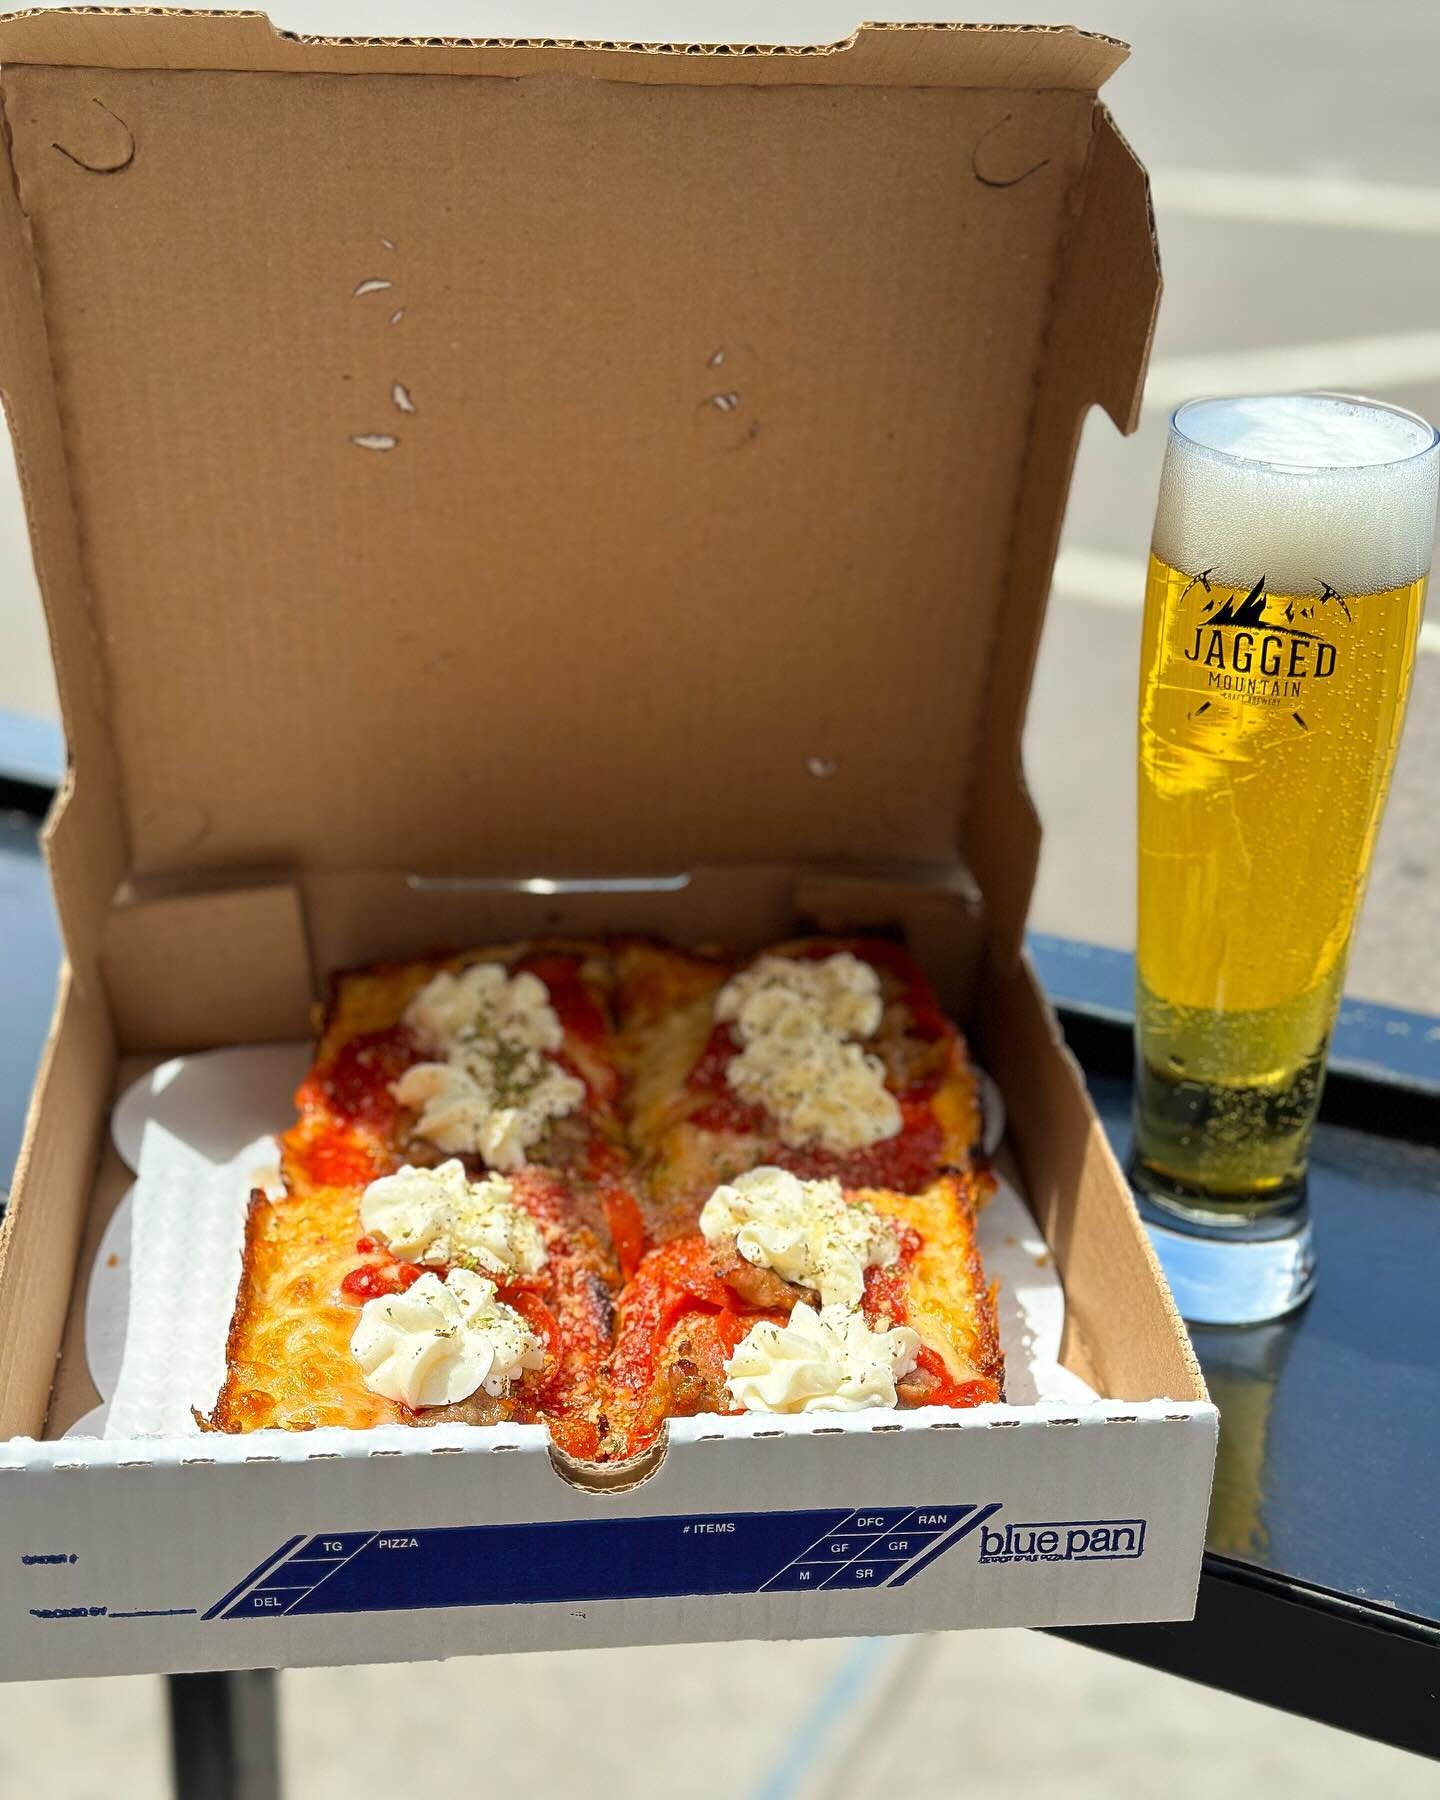 Looking to be a pretty good Saturday 🍕🍻
@bluepanfoodtruck is here till 8pm and serving up crispy bois till 10pm!
We will be showing the Avs game starting at 8pm so come cheer them on 🏒

#coloradocraftbeer #stateofcraftbeer #supportlocal #downtownd